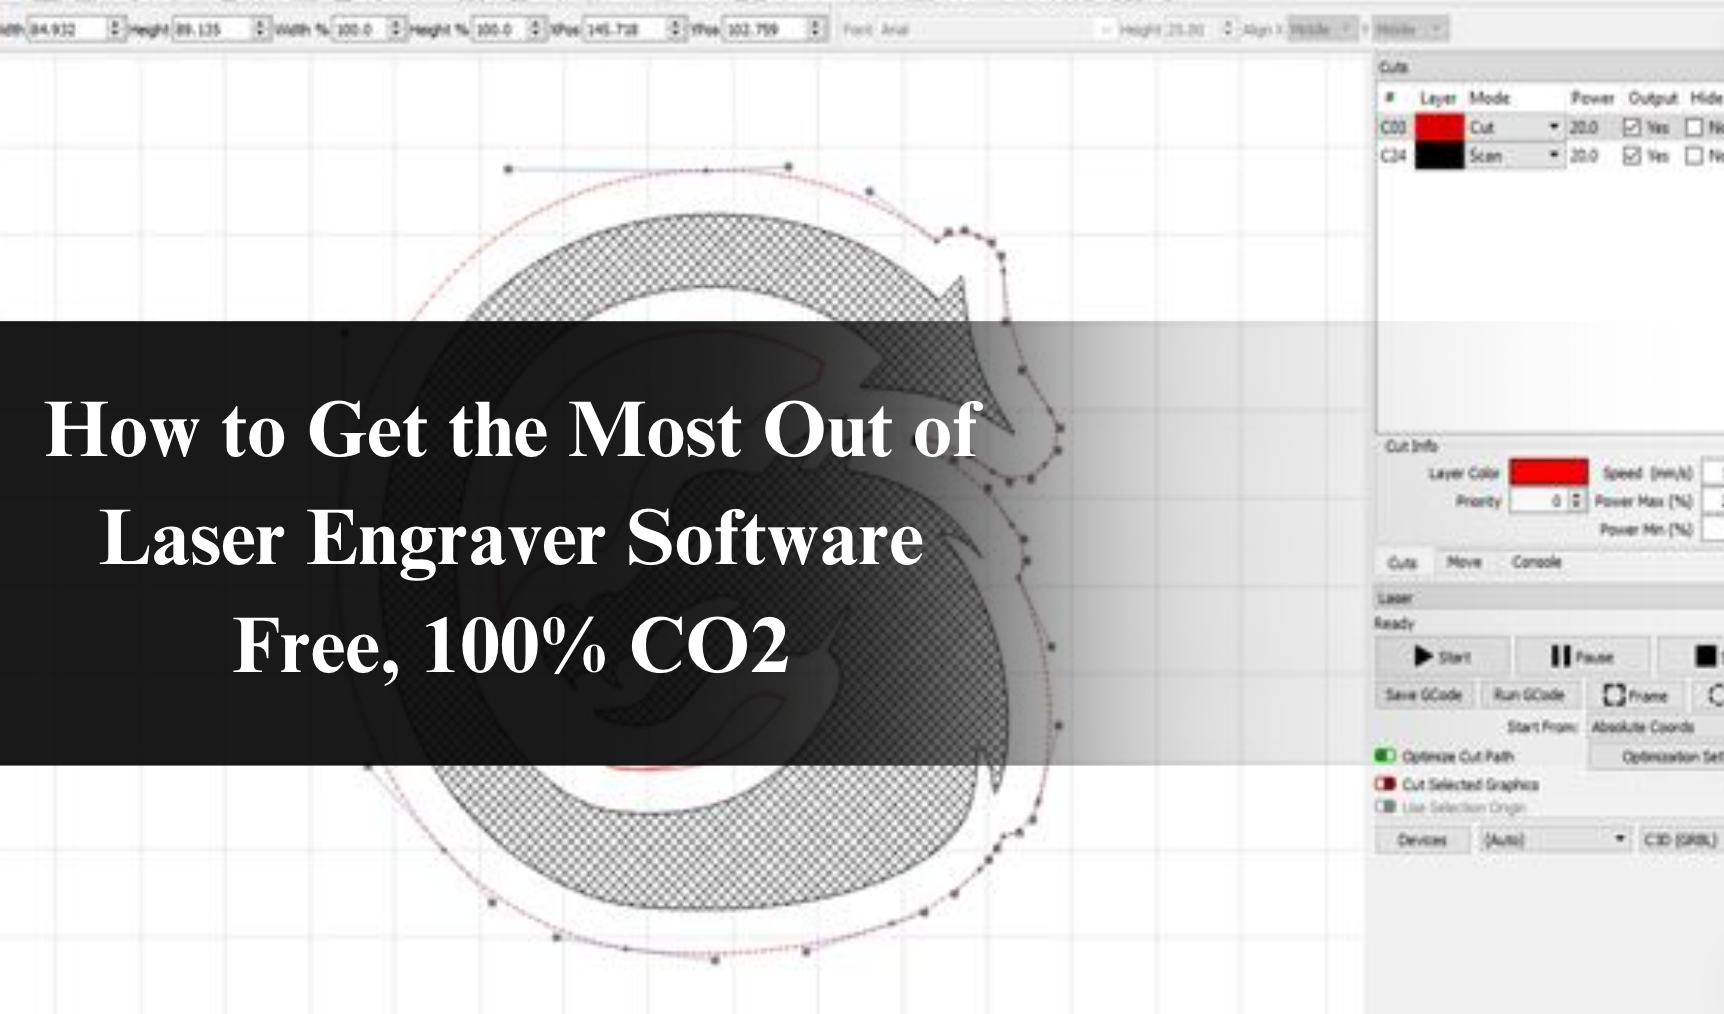 How to Get the Most Out of Laser Engraver Software Free, 100% CO2